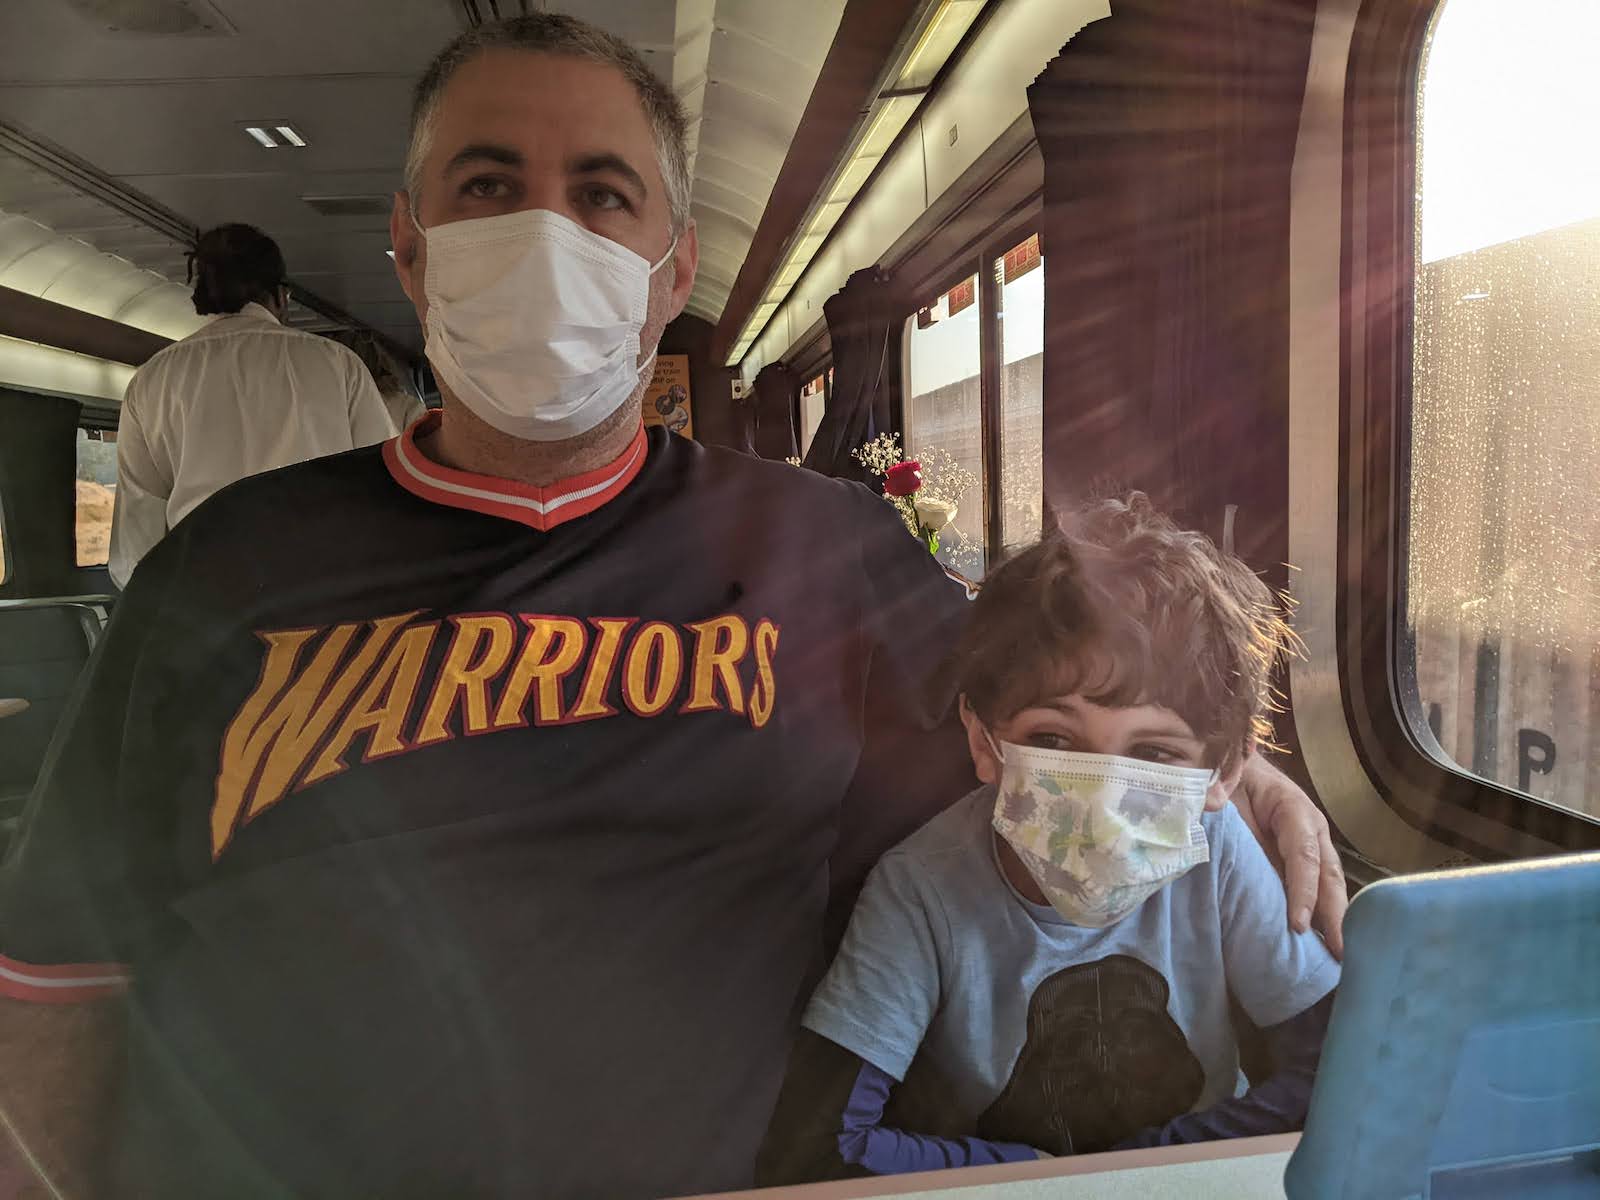 A man in a warrior's shirt and face mask sits in a train seat next to a young boy with a face mask